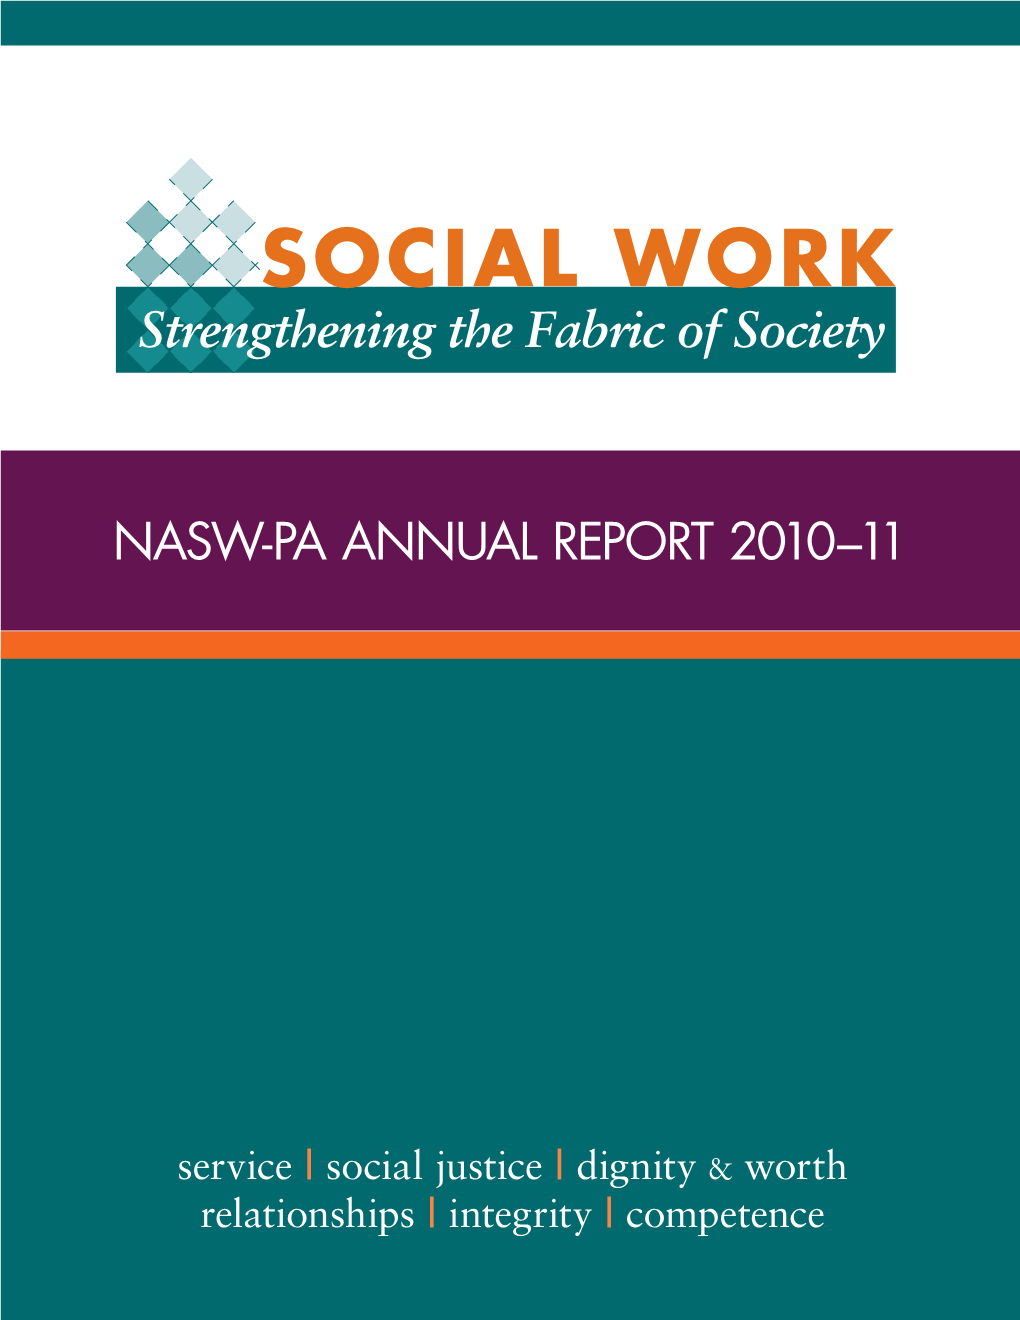 SOCIAL WORK Strengthening the Fabric of Society